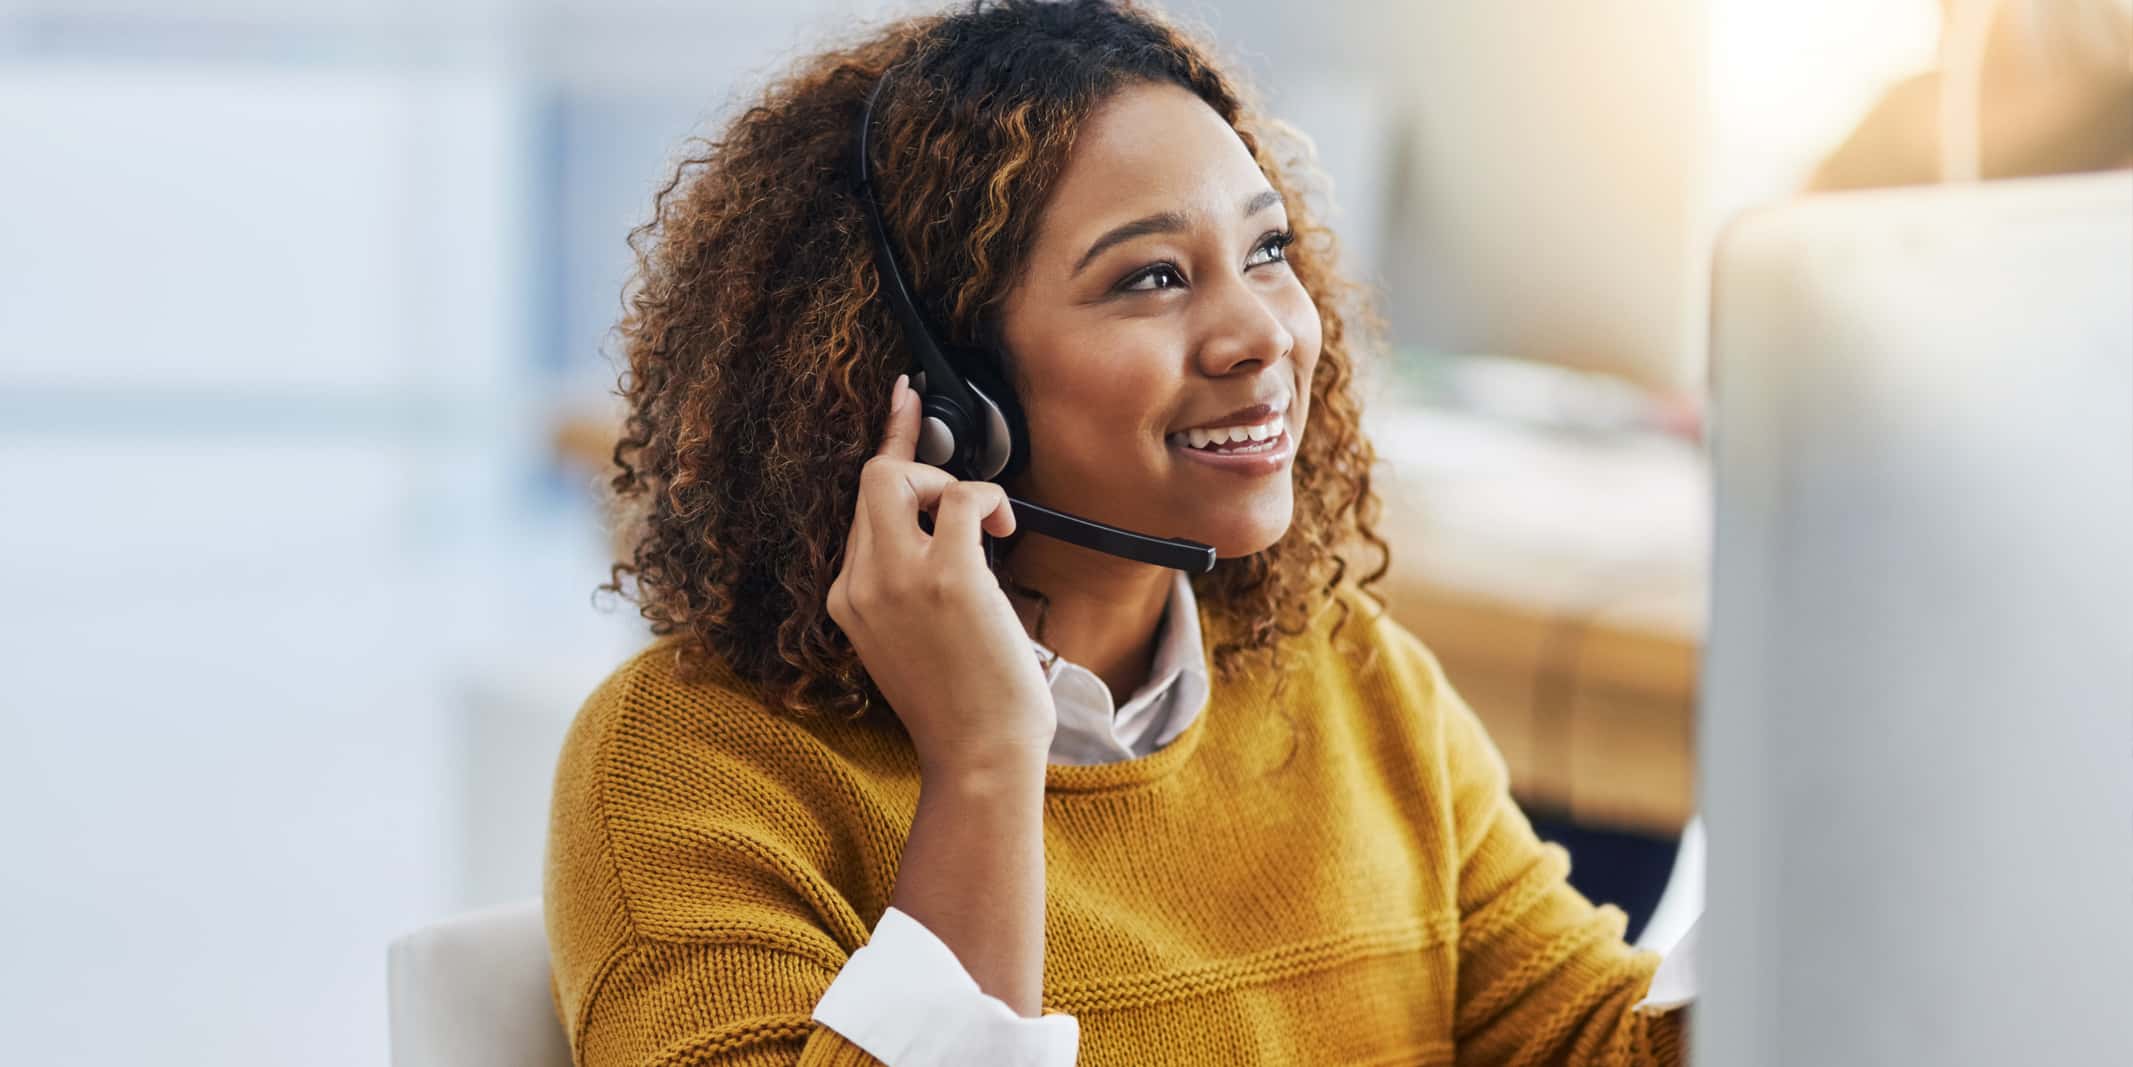 contact center agent delivering a personalized experience